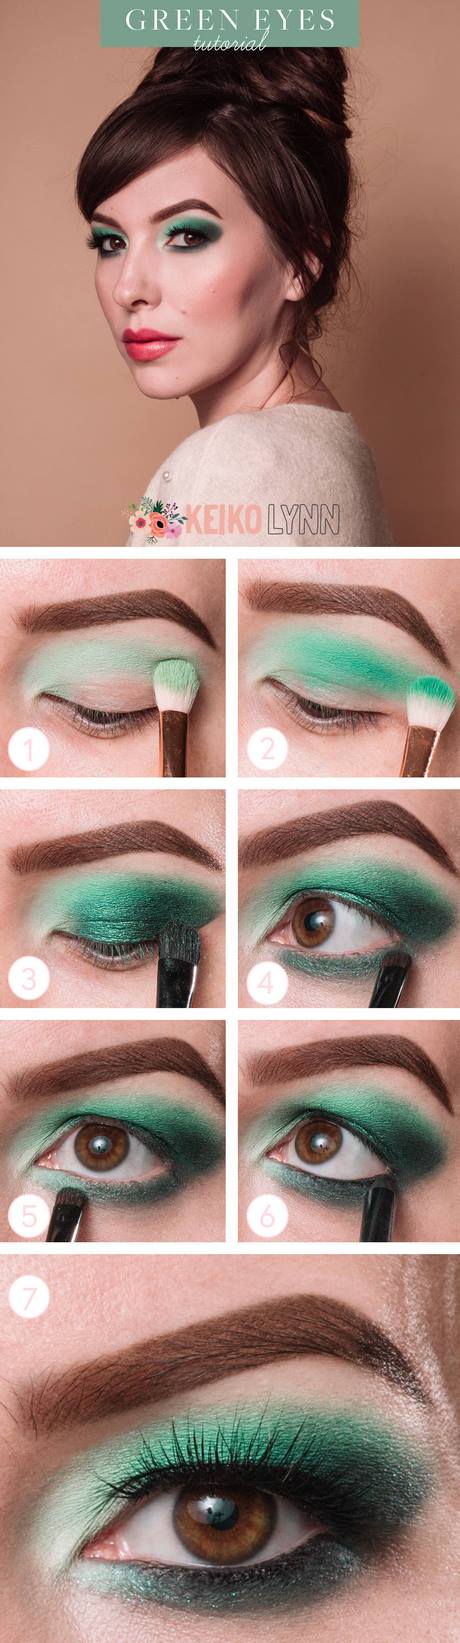 makeup-tutorial-with-pictures-15_3 Make-up les met foto  s